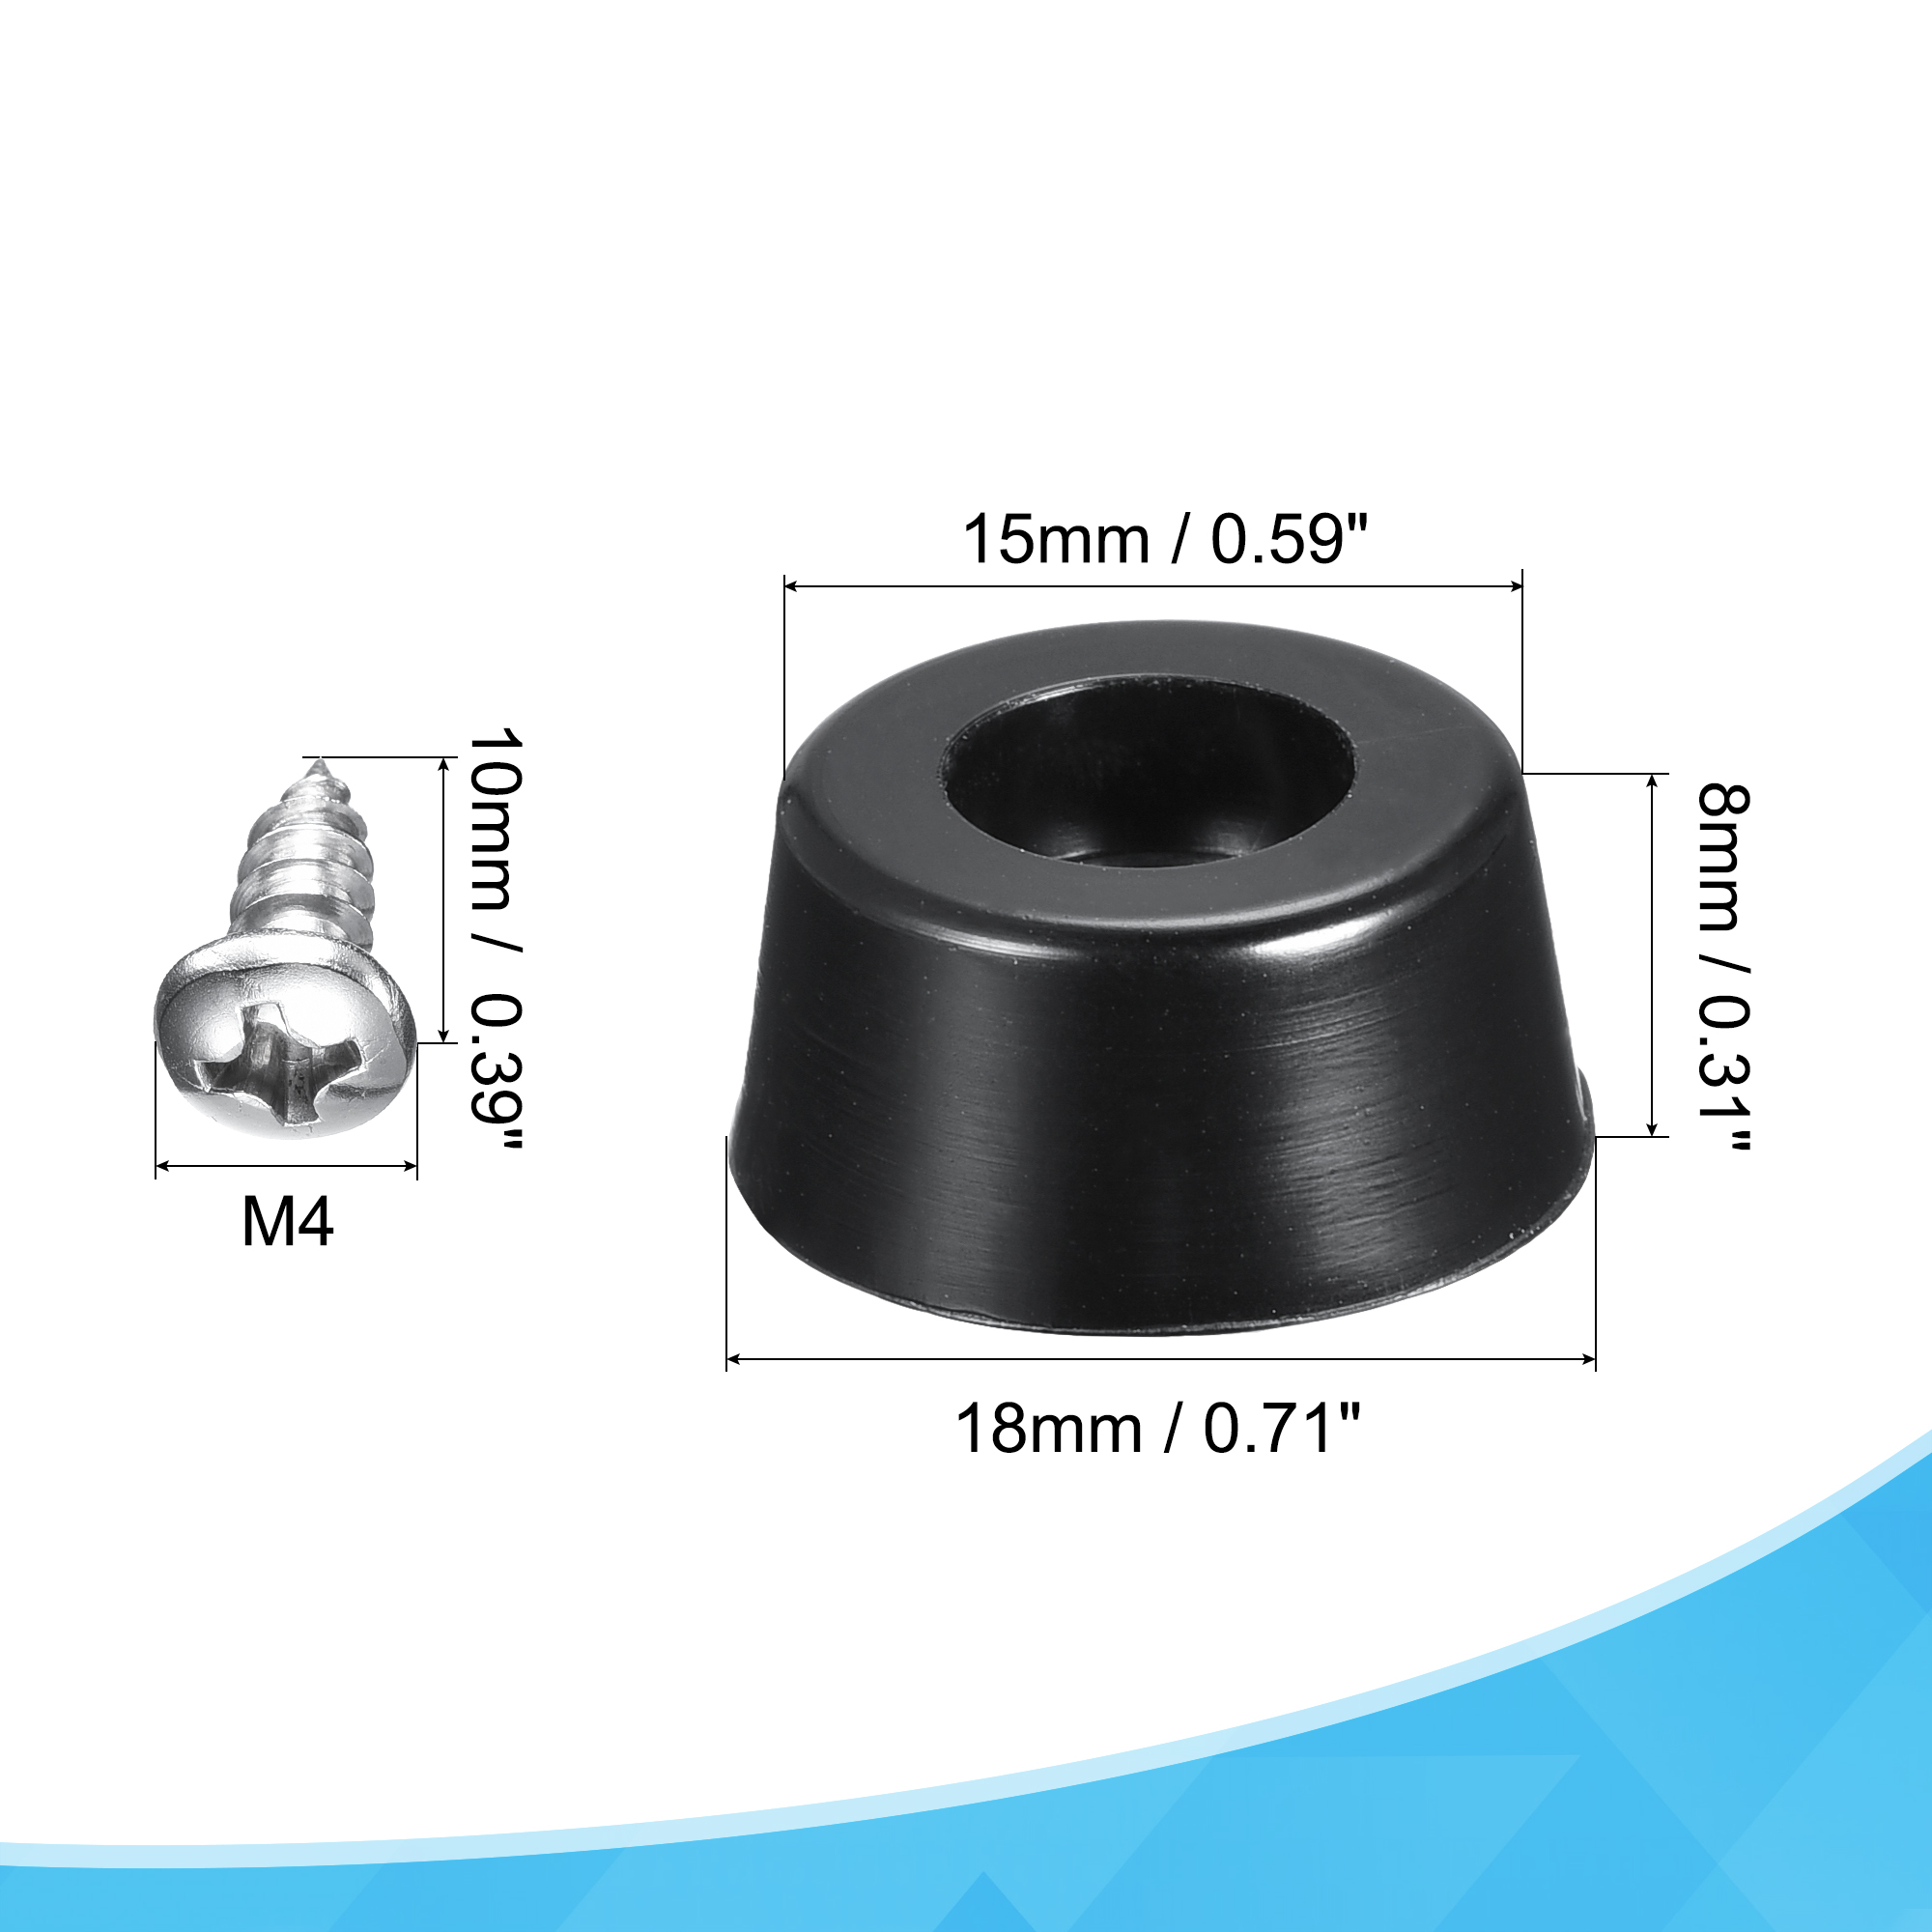 Uxcell 0.71" W x  0.31" H Rubber Bumper Feet, Stainless Steel Screws and Washer 16 Pack - image 3 of 5